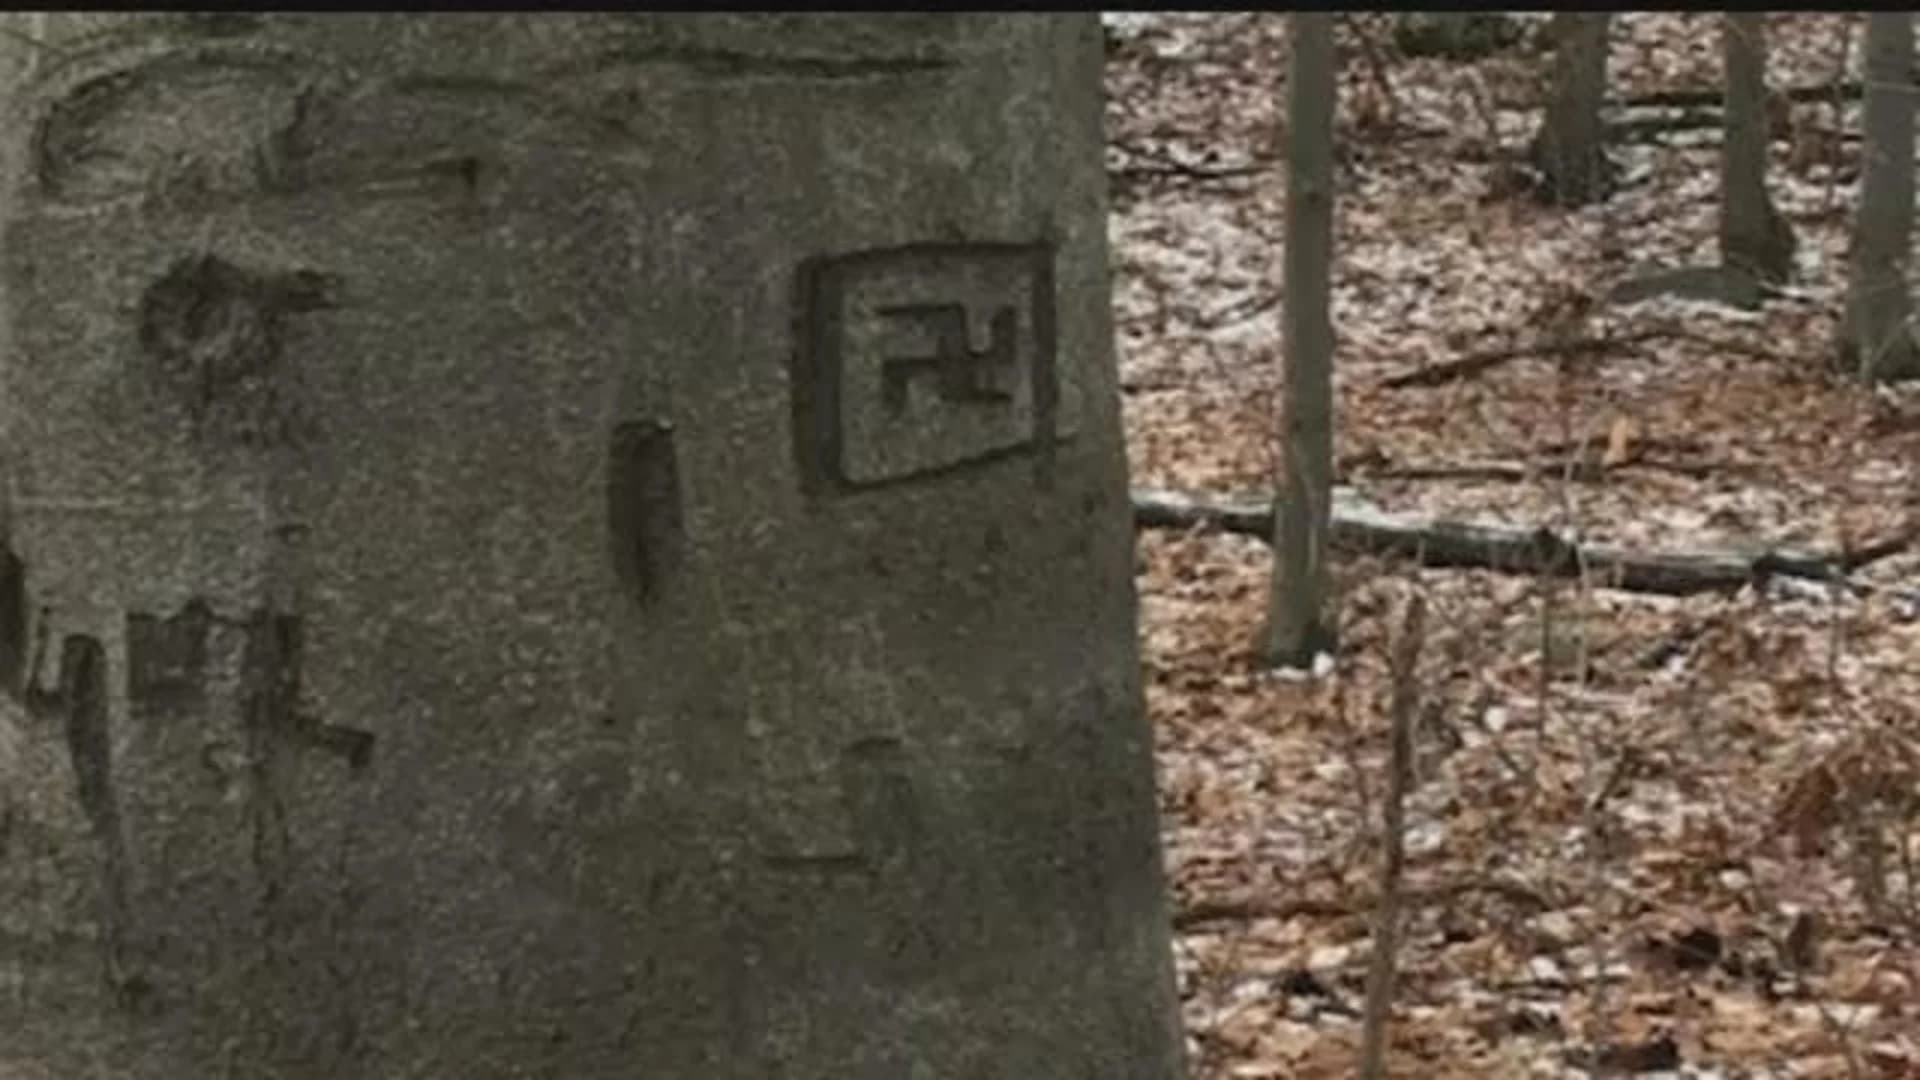 Swastika found carved into tree at Redding park